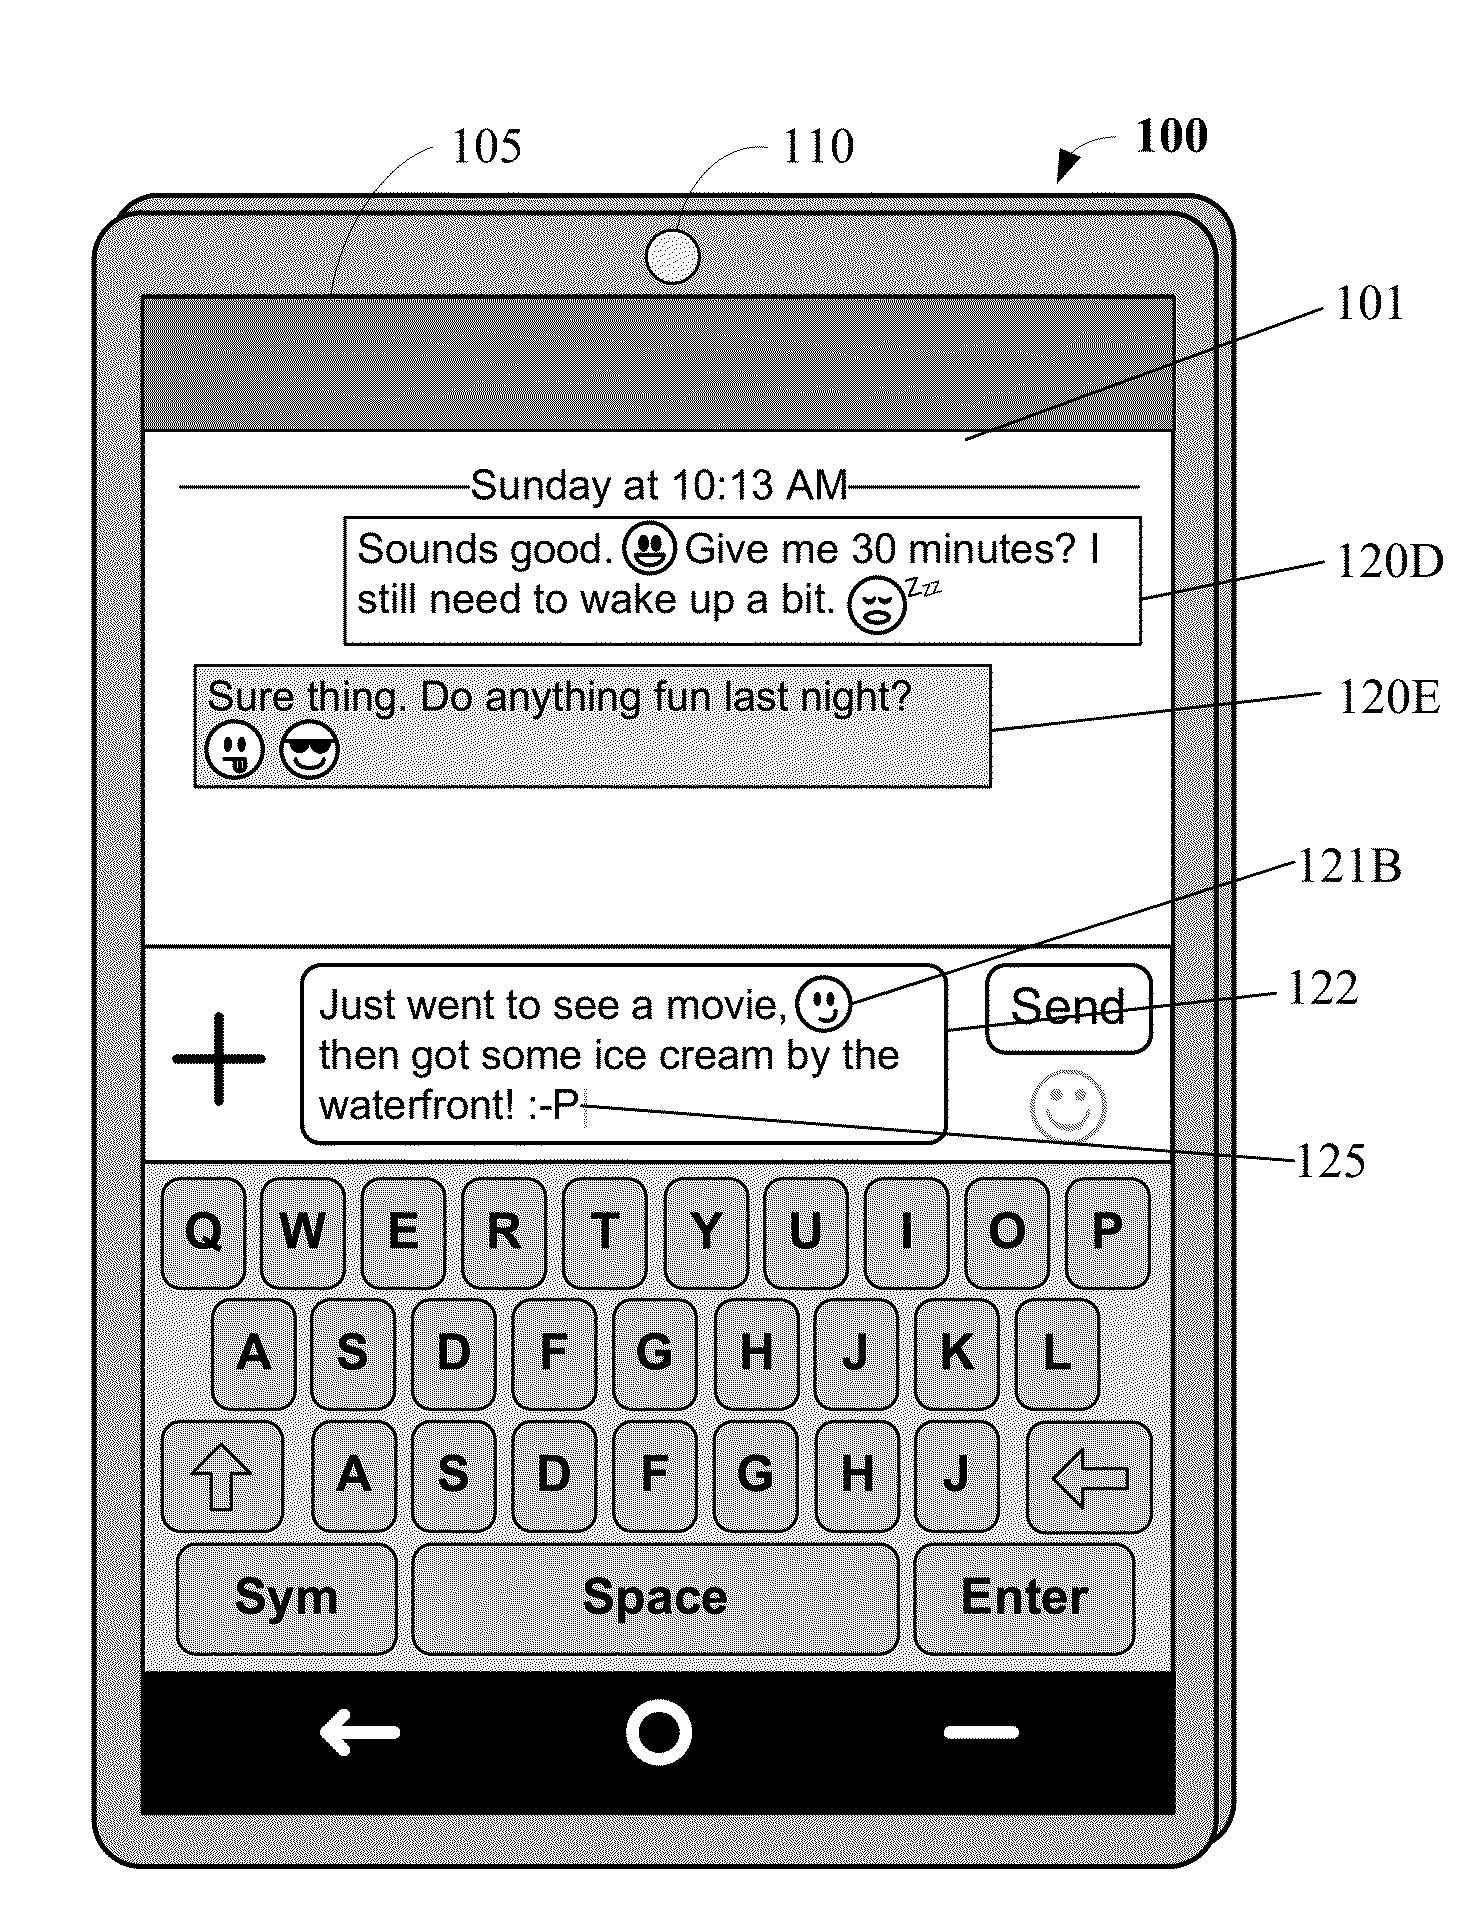 Controlling Access to Ideograms  - US-2015222617-A1